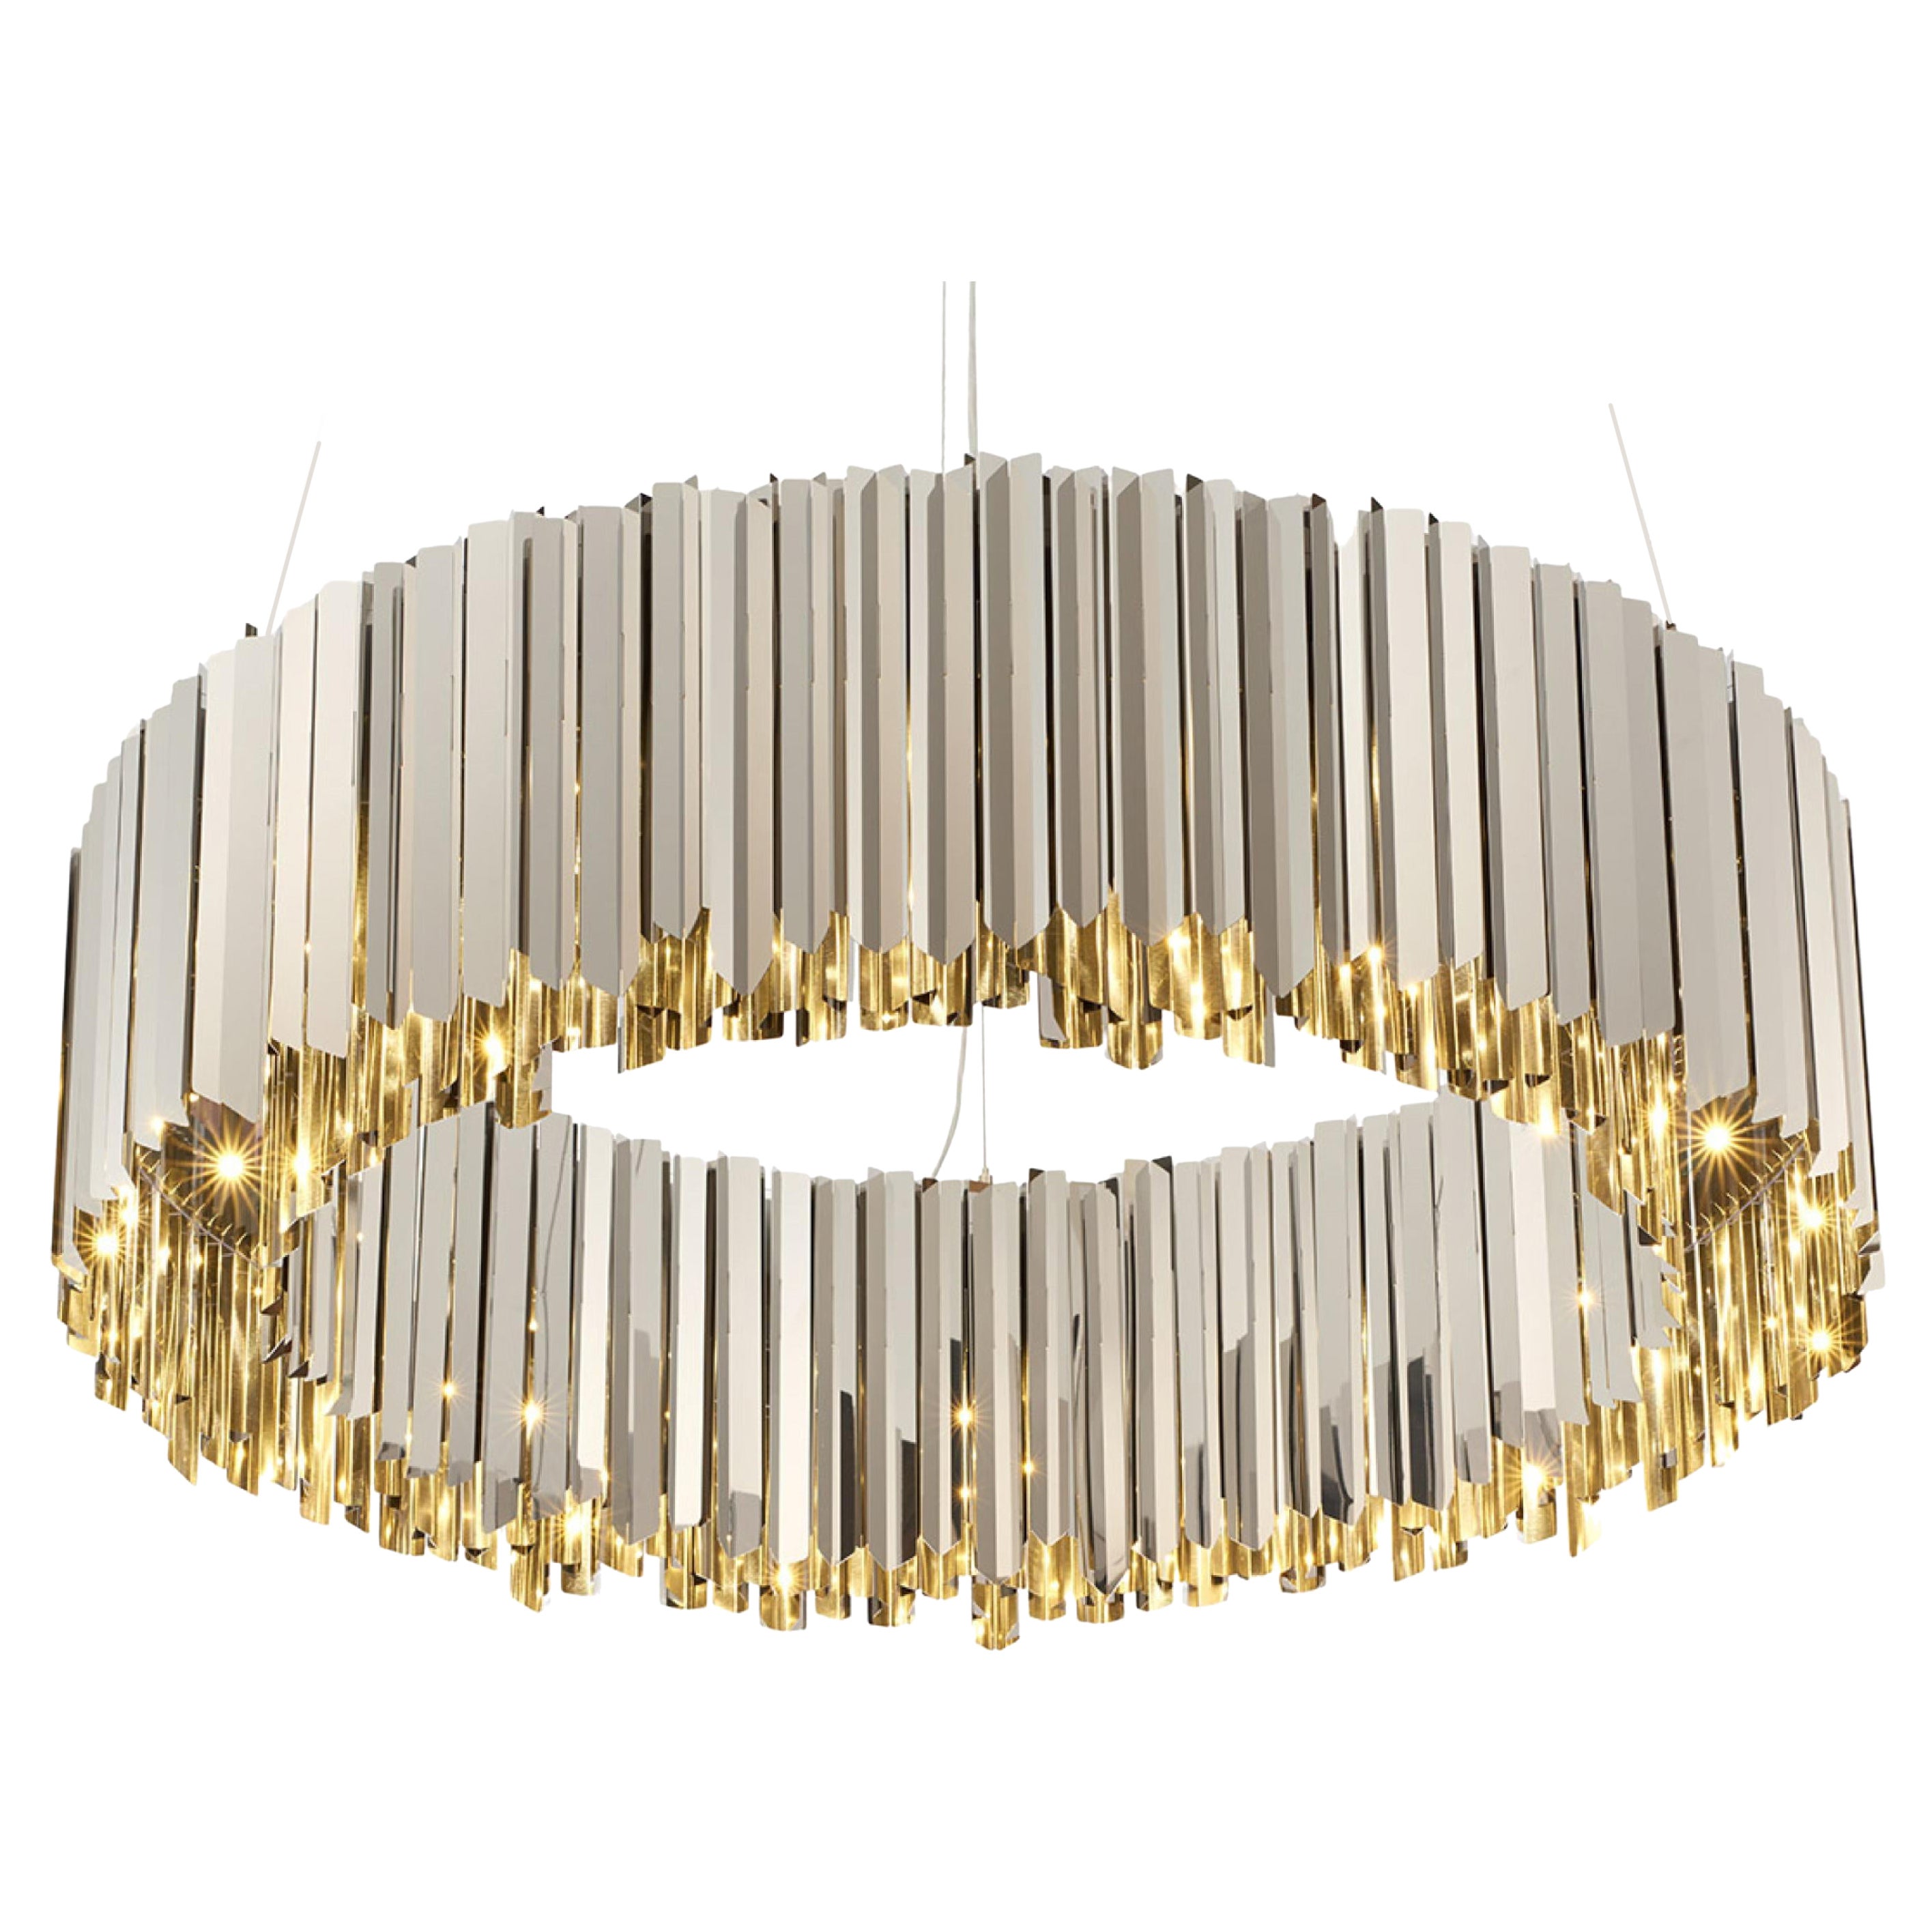 Facet Chandelier 900mm / 35.5" in Polished Stainless Steel by Tom Kirk UL Listed